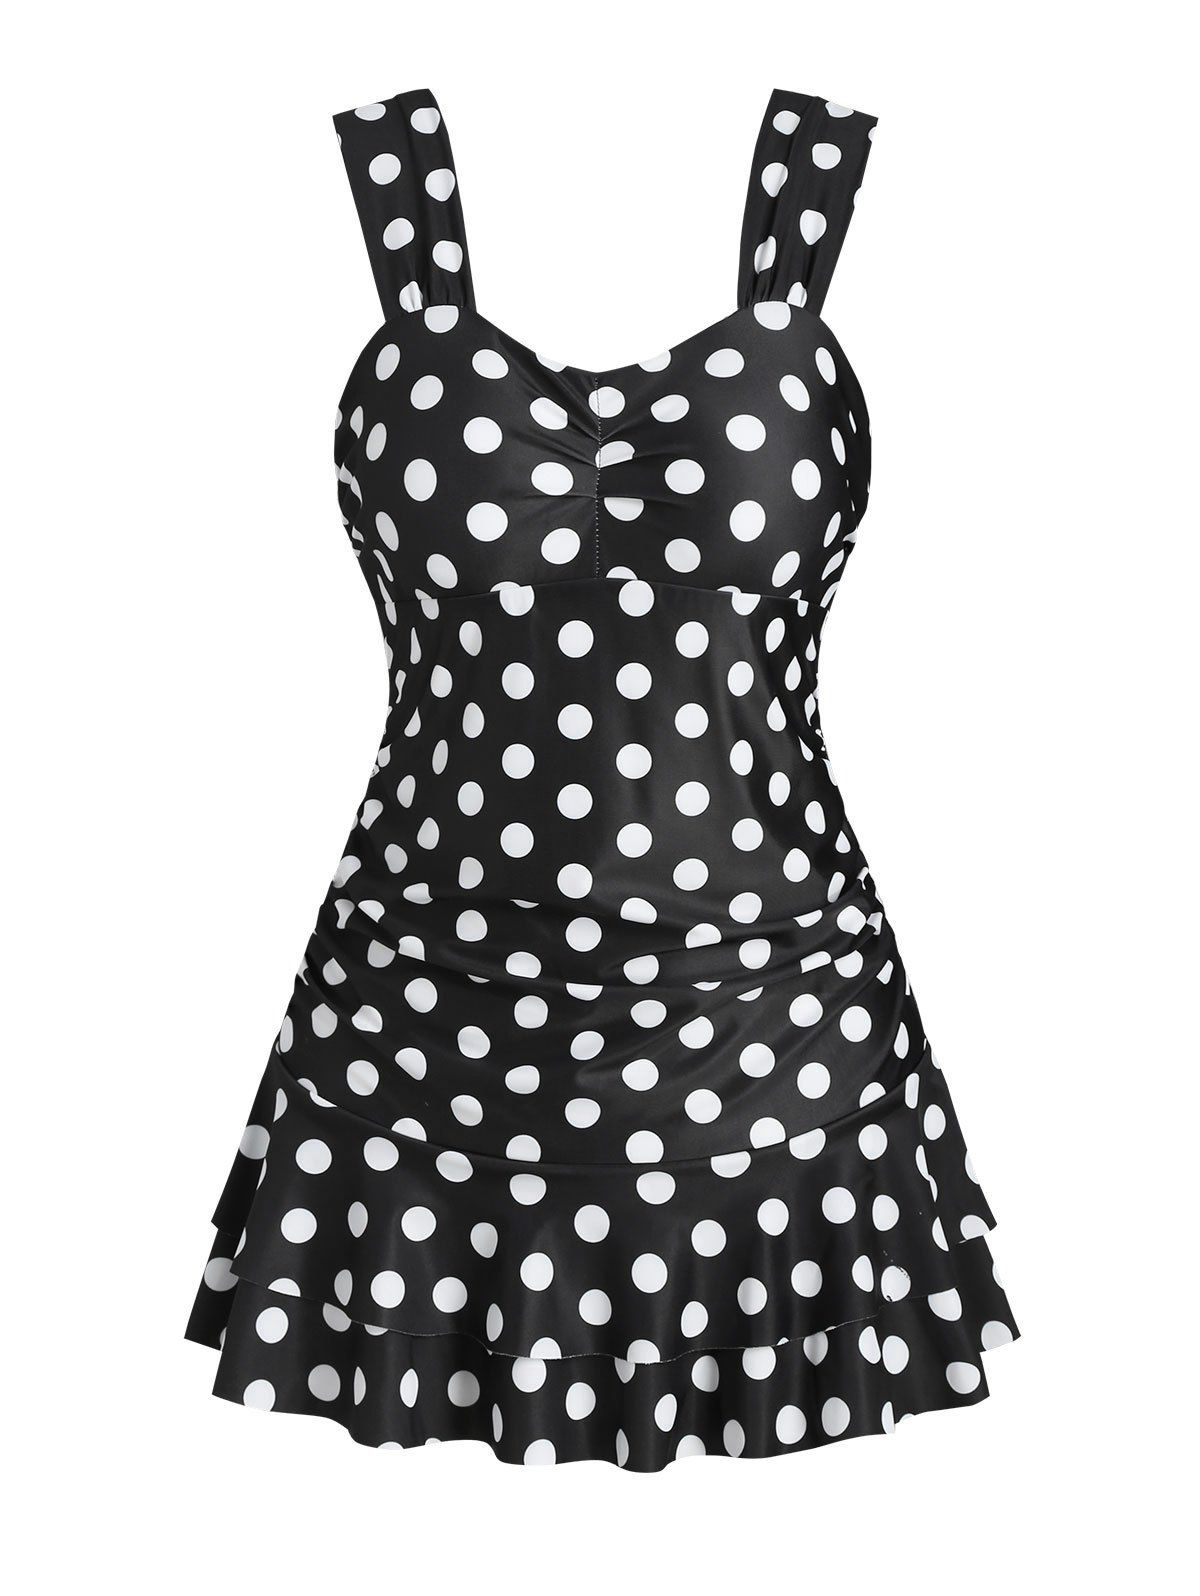 Ruched Polka Dot Peplum One-piece Swimsuit - BLACK S